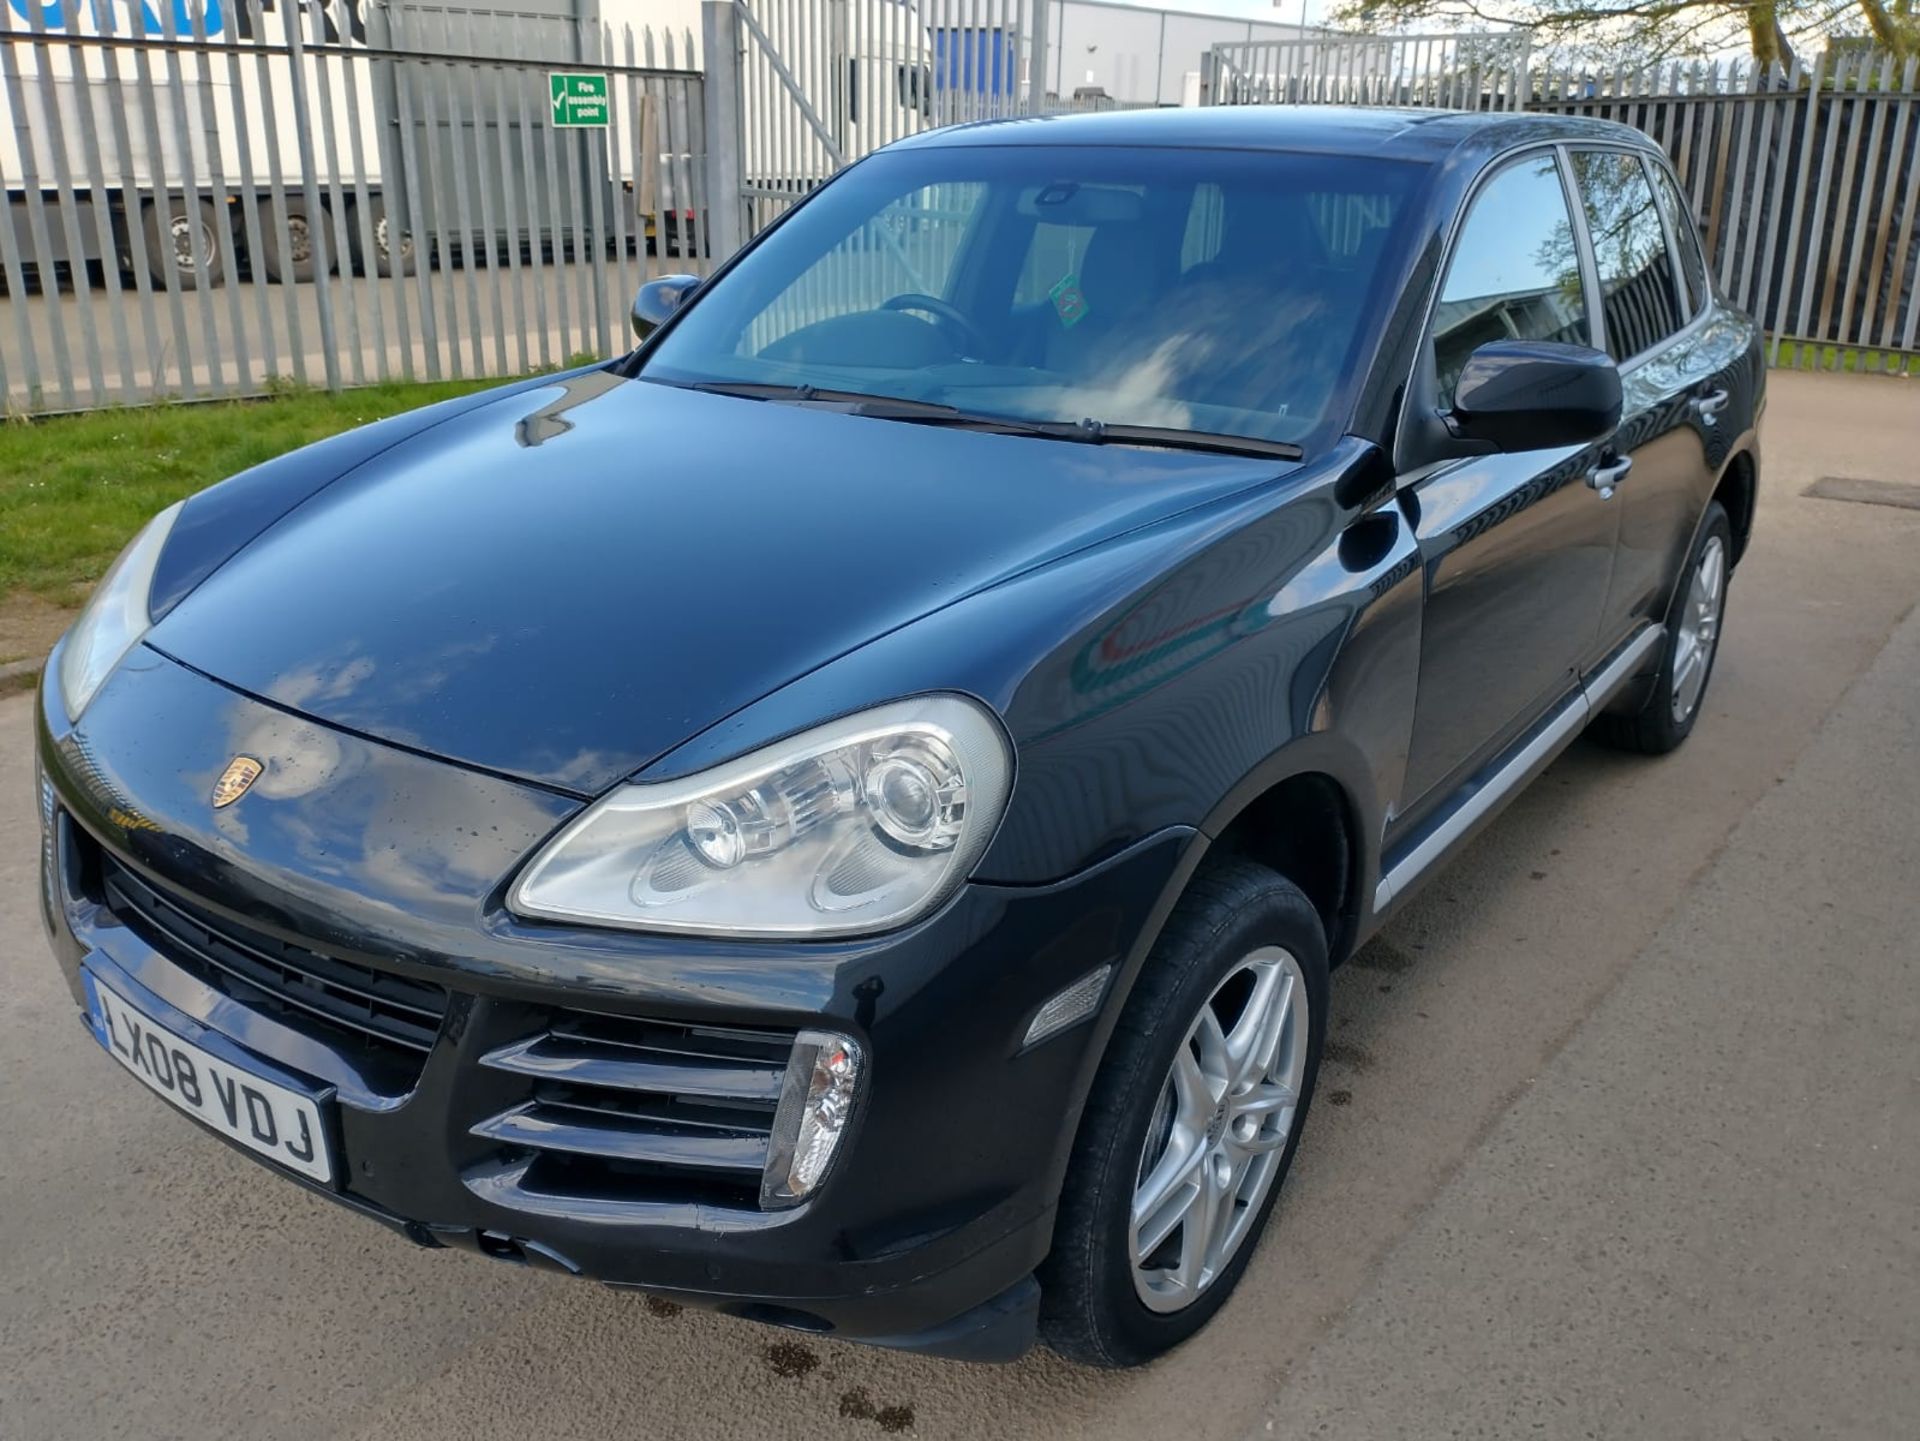 2008 Porsche Cayenne Tiptronic 3.6 5Dr SUV - CL505 - NO VAT ON THE HAMMER - Location: Corby, Northam - Image 2 of 16